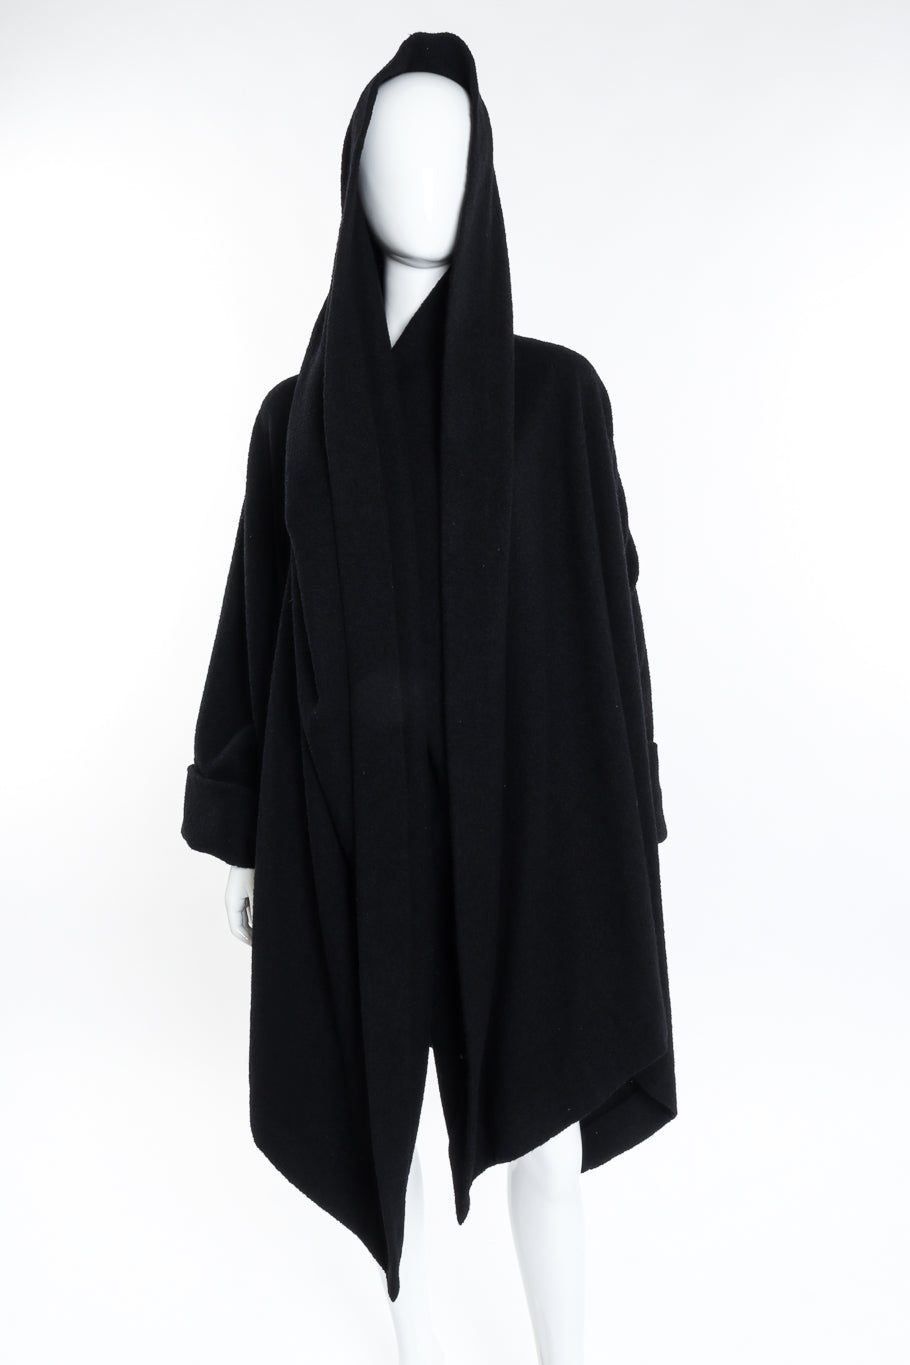 Vintage Romeo Gigli Nubby Wool Duster front on mannequin hood up @recess la